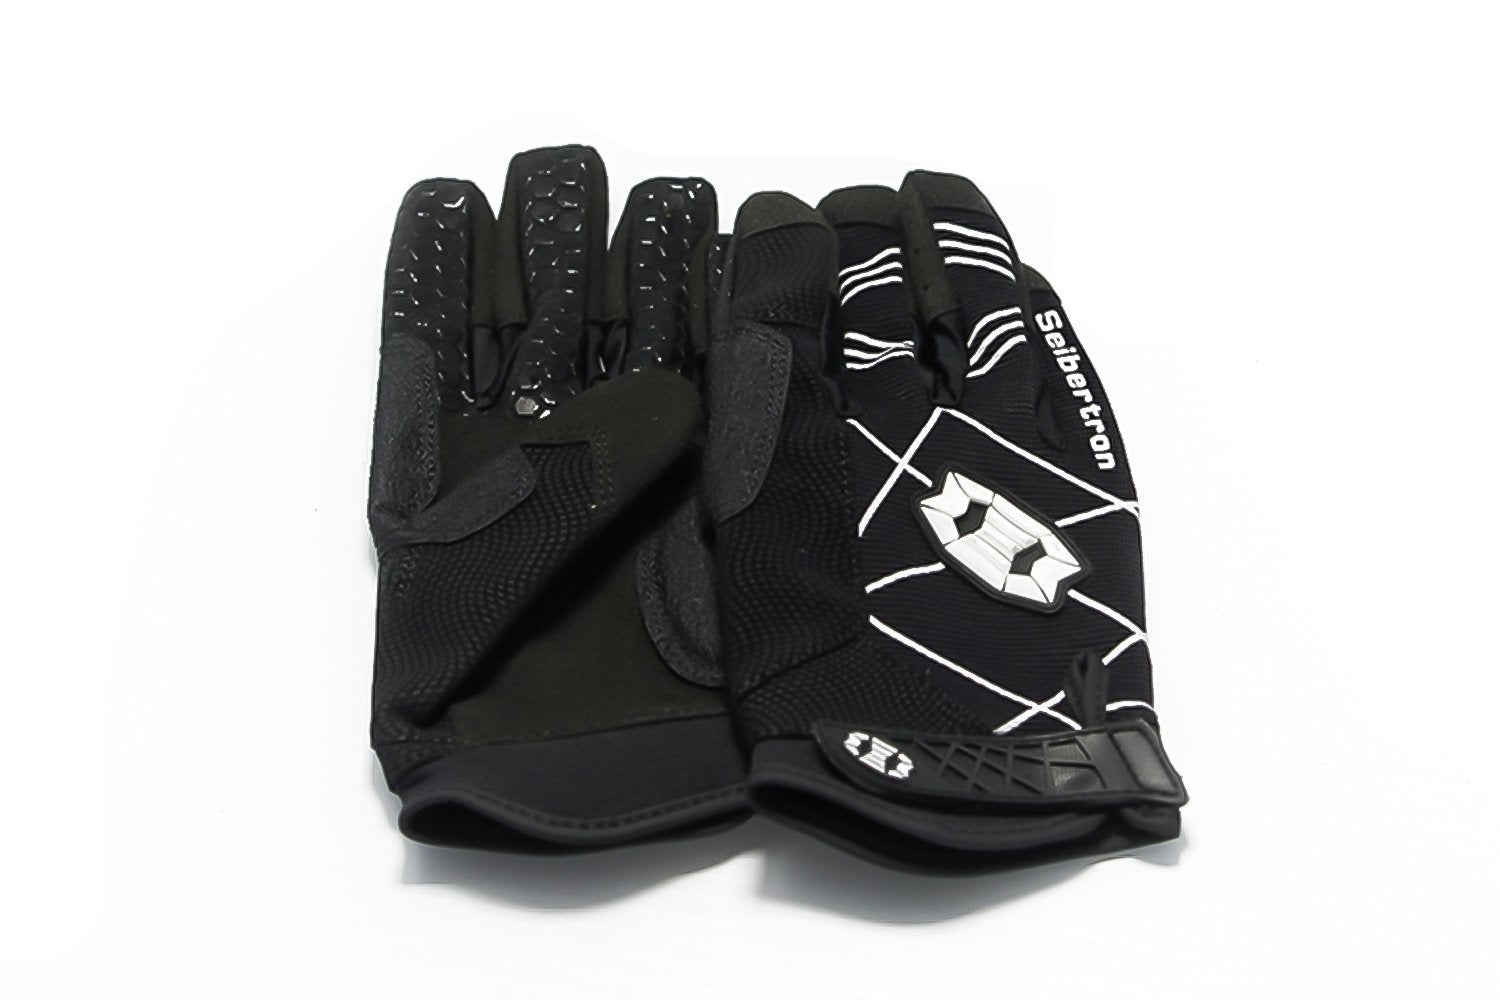 Seibertron B-A-R PRO 2.0 Signature Baseball/Softball Batting Gloves Super Grip Finger Fit for Adult and Youth (SIZE S) - e4cents